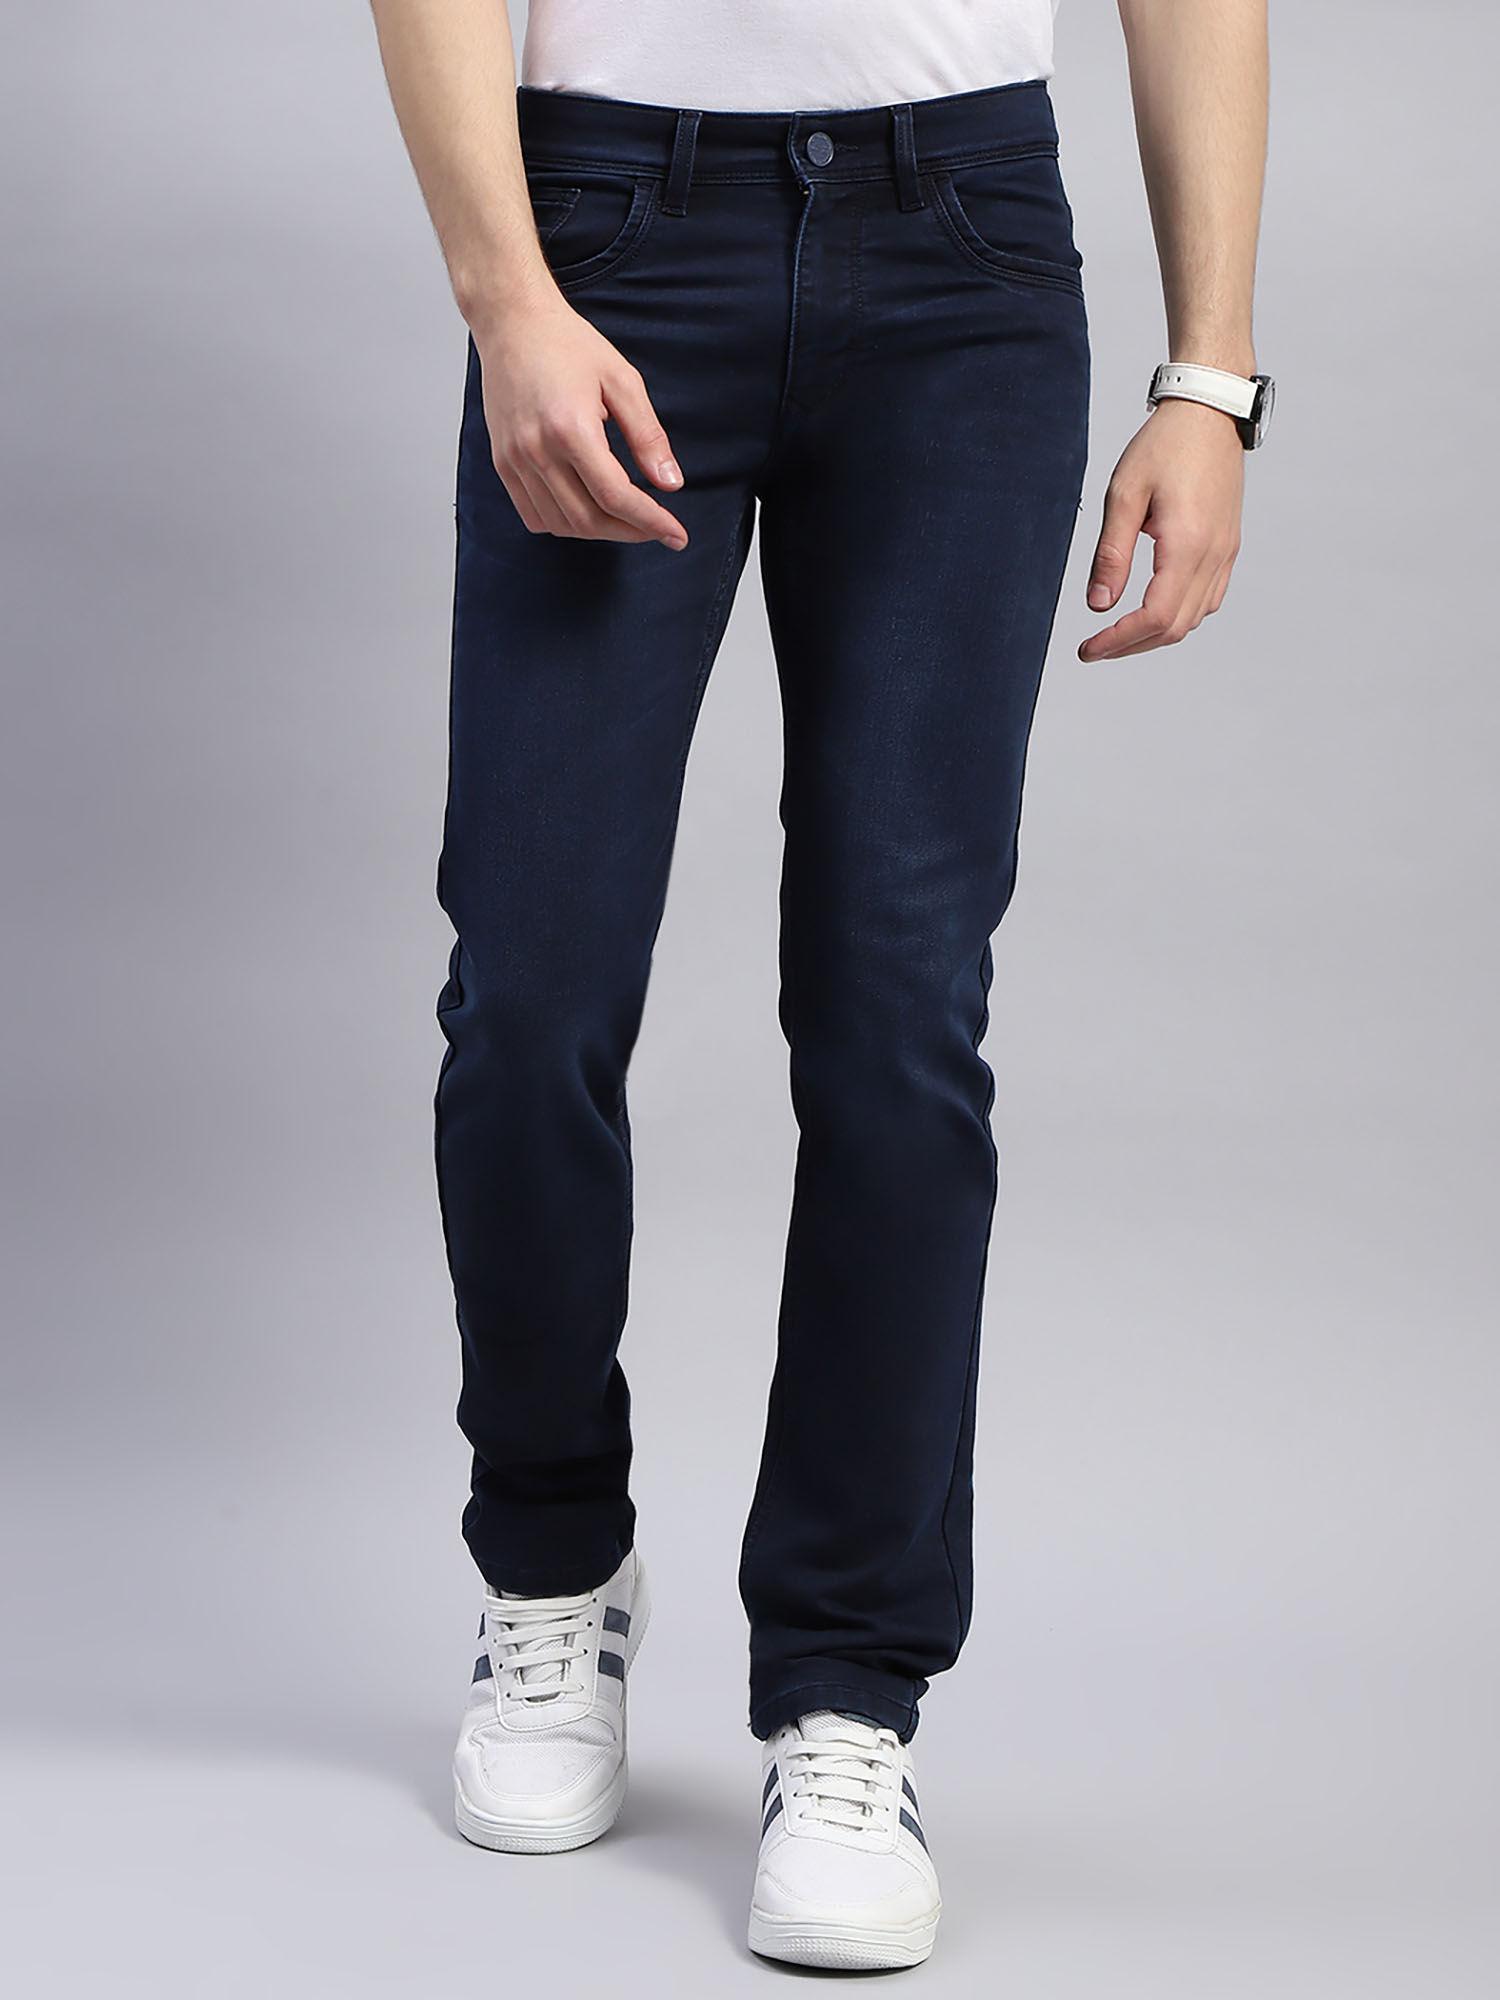 Mens Solid Dark Blue Straight Fit Casual Jeans